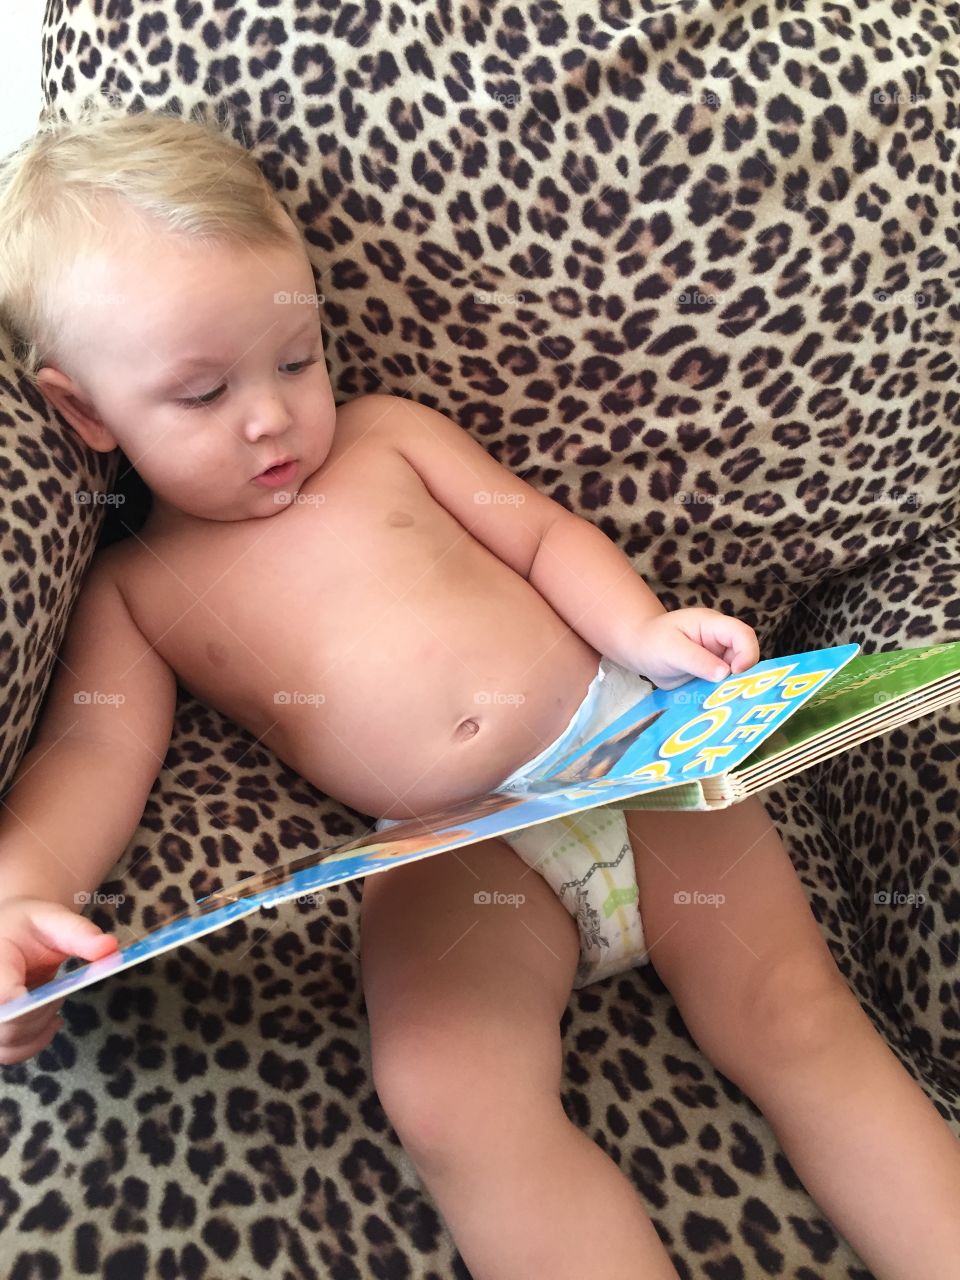 My grandson reading a book